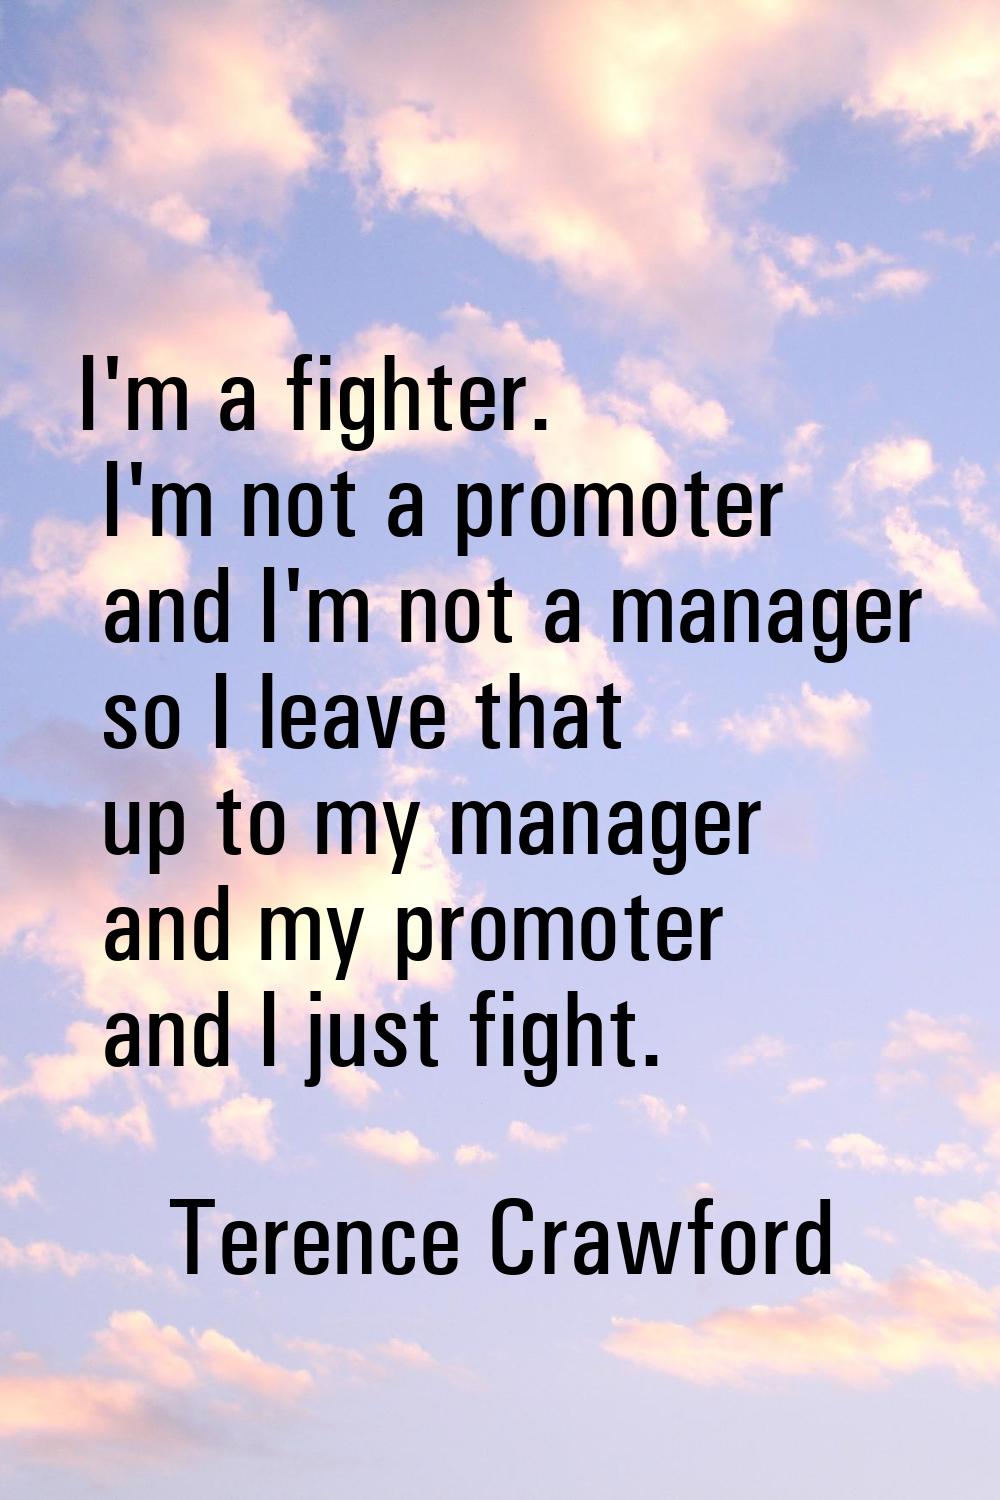 I'm a fighter. I'm not a promoter and I'm not a manager so I leave that up to my manager and my pro